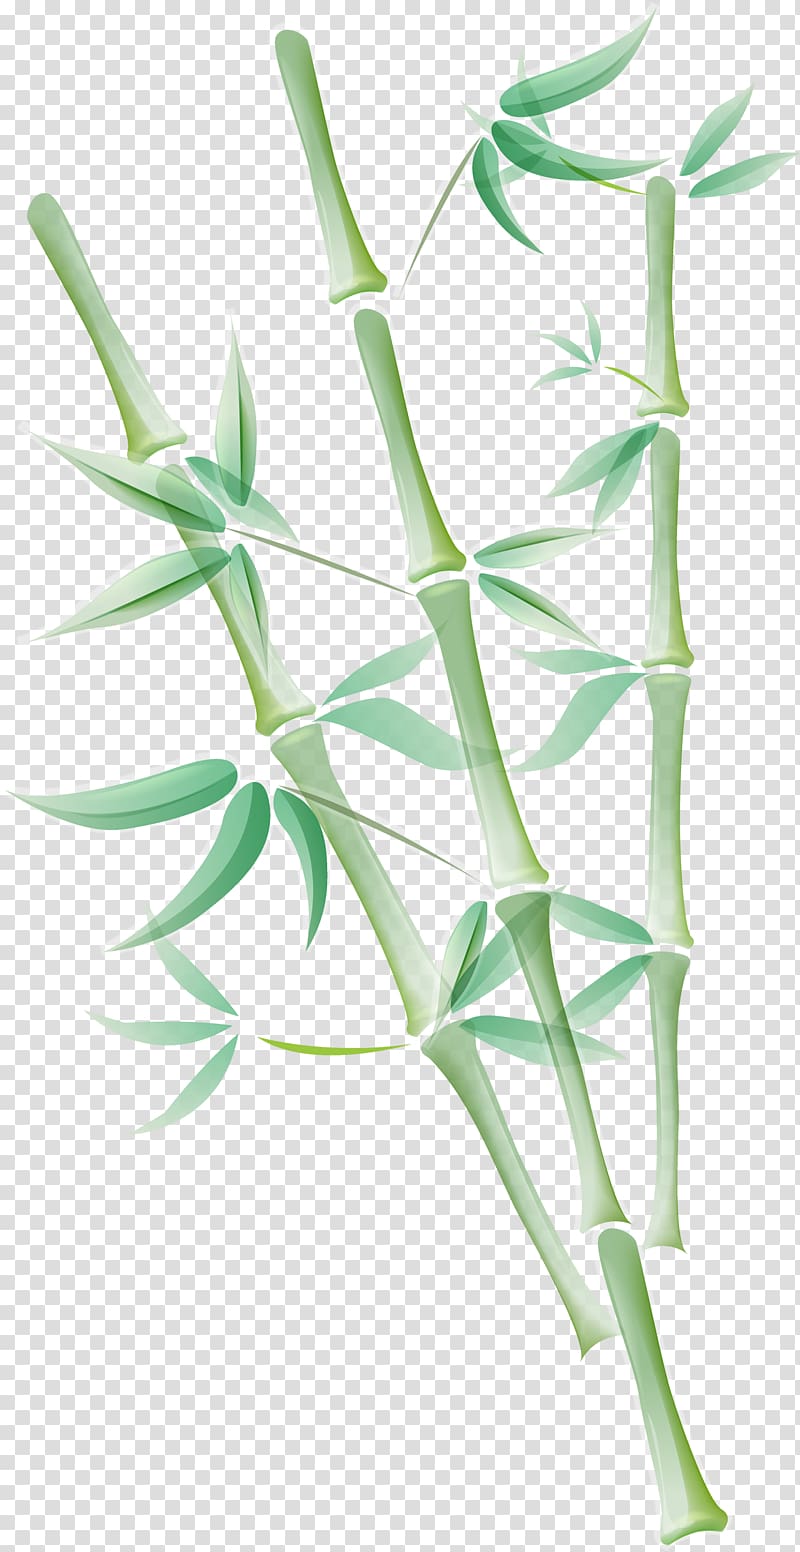 Grasses Tropical woody bamboos Bamboo, Zen Spa Shaxsiy gigiyena Leaf, Coriander Leaves transparent background PNG clipart